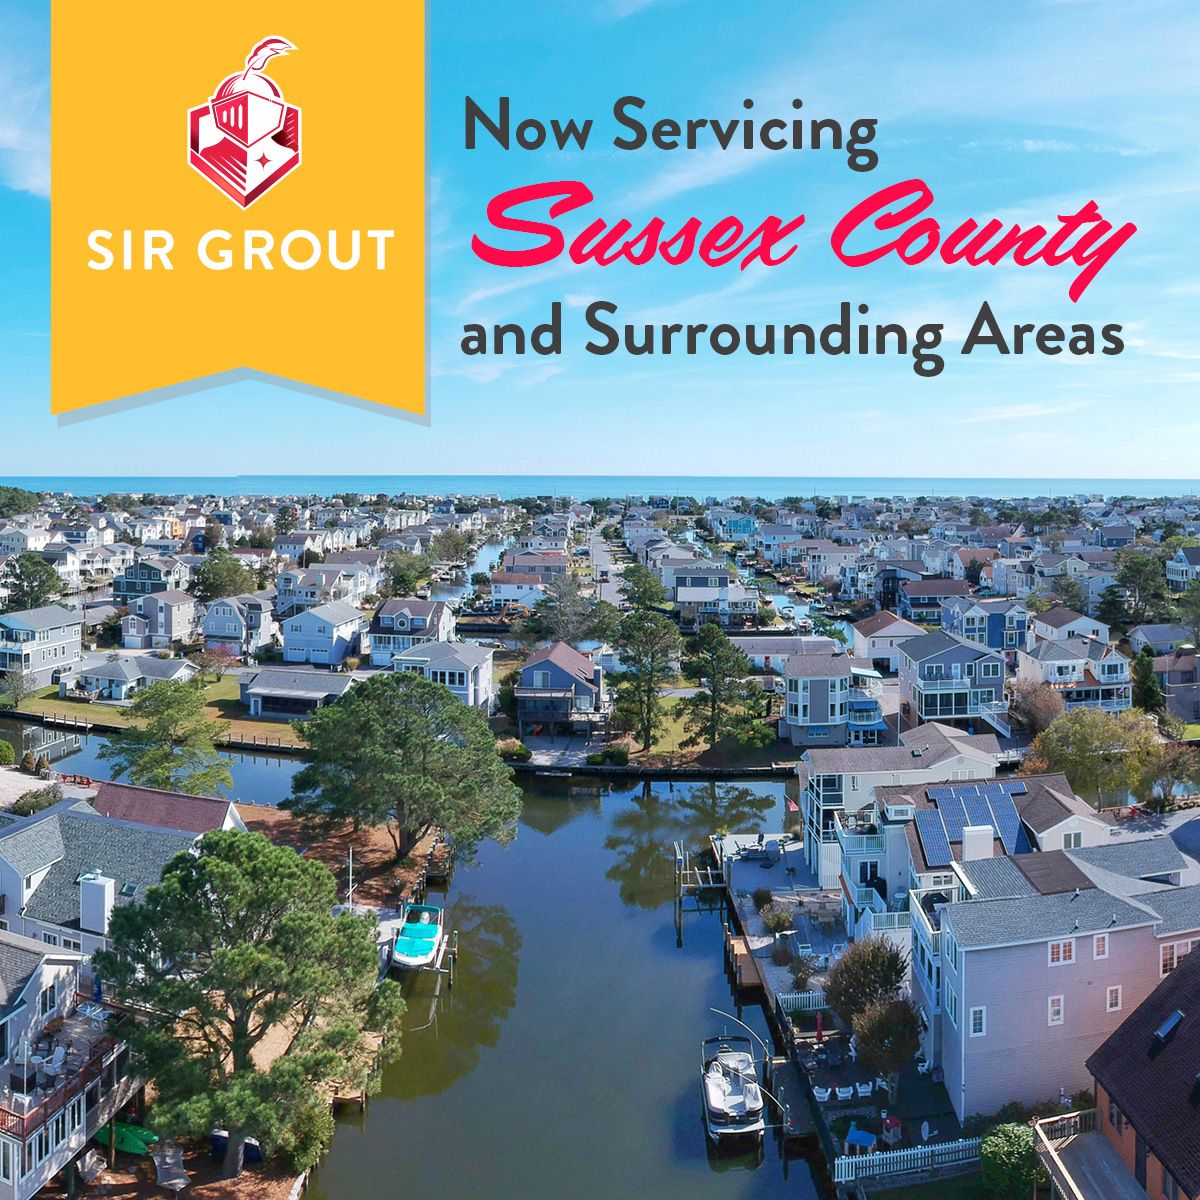 Sir Grout Now Servicing Sussex County and Surrounding Areas